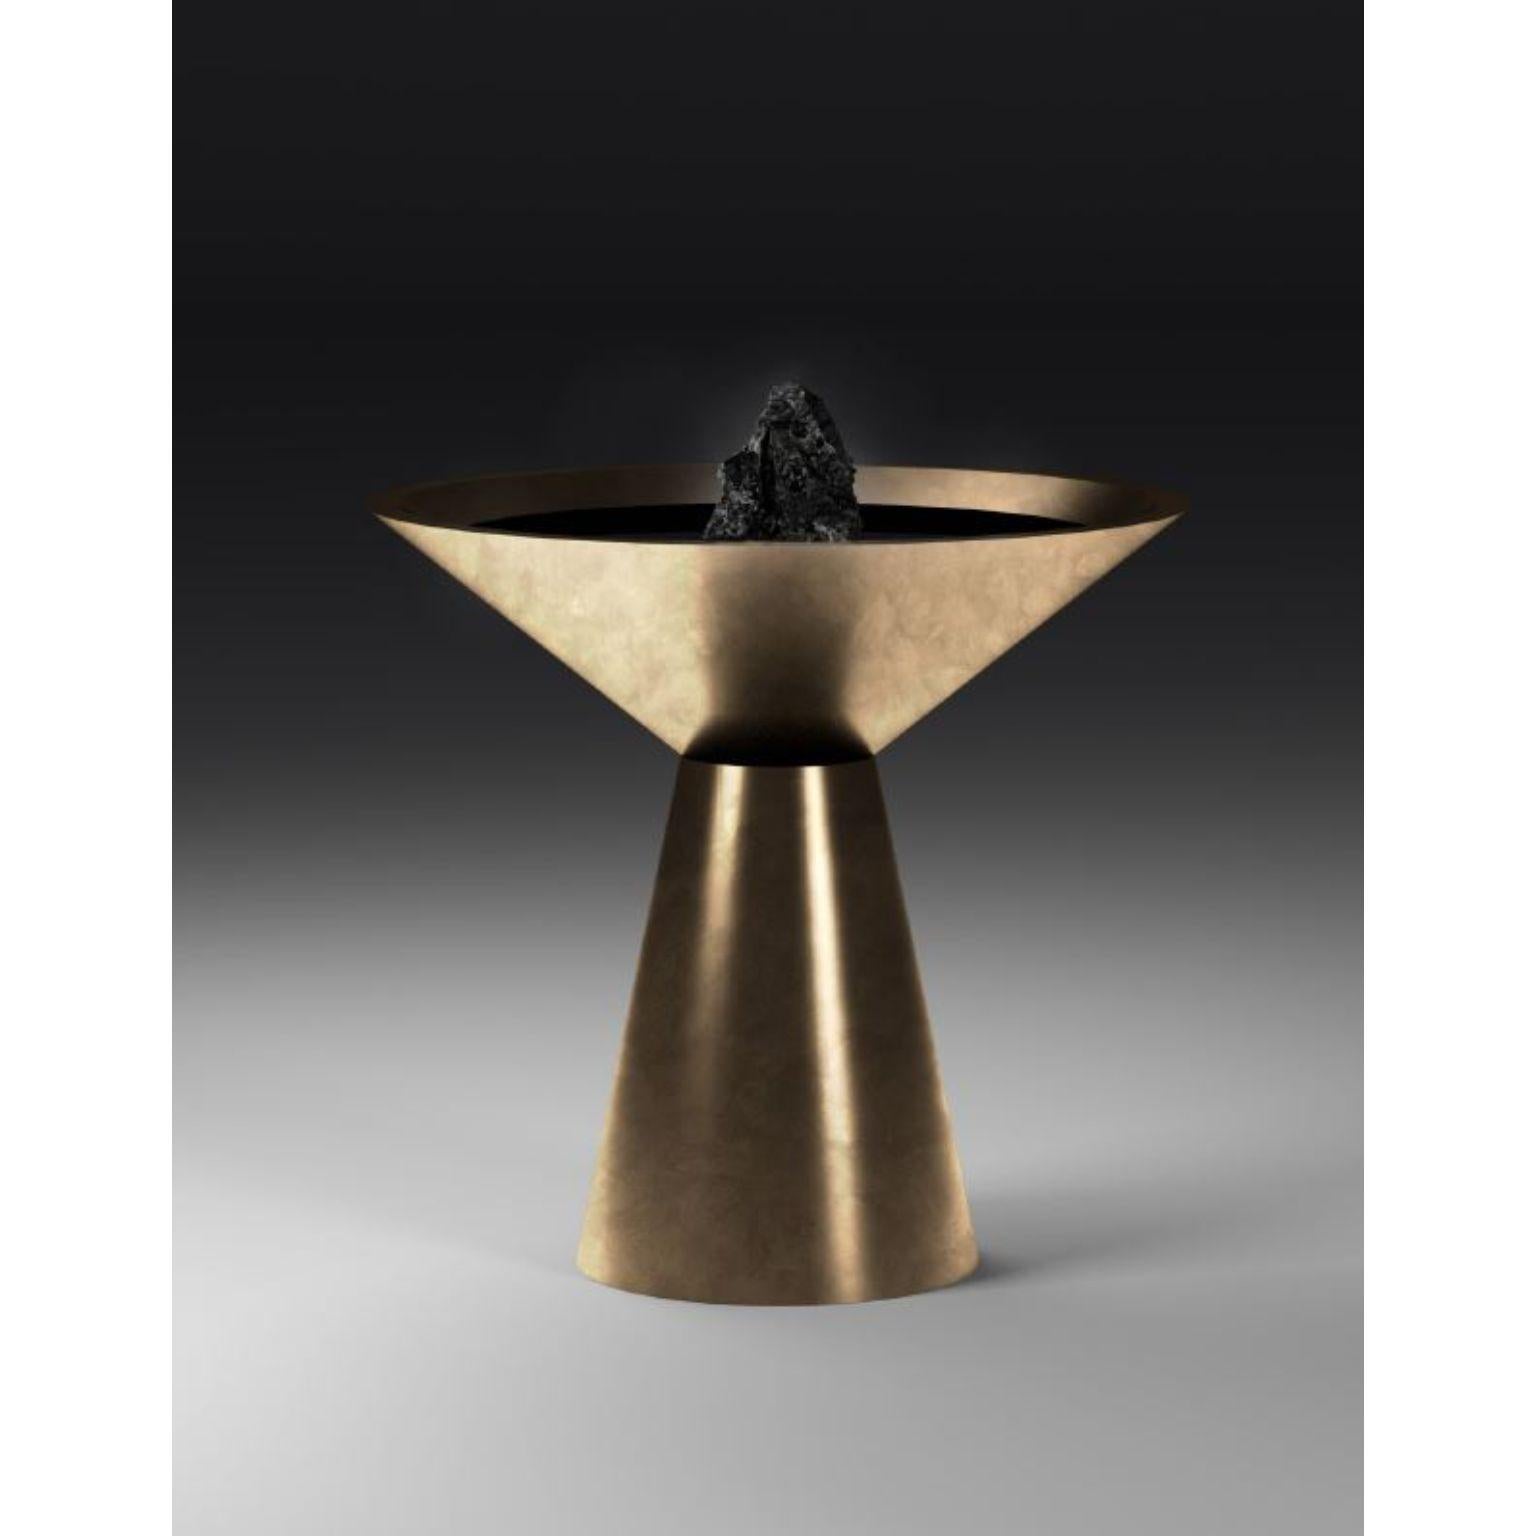 Fountain with Noir Belge by Pierre De Valck.
Dimensions: W 70 x D 70 x H 90 cm.
Materials: Patinated brass with Noir Belge.
Weight: 65 kg.
Each piece is unique.

Pierre De Valck (1991) born in Brussels, is a Ghent-based designer with a